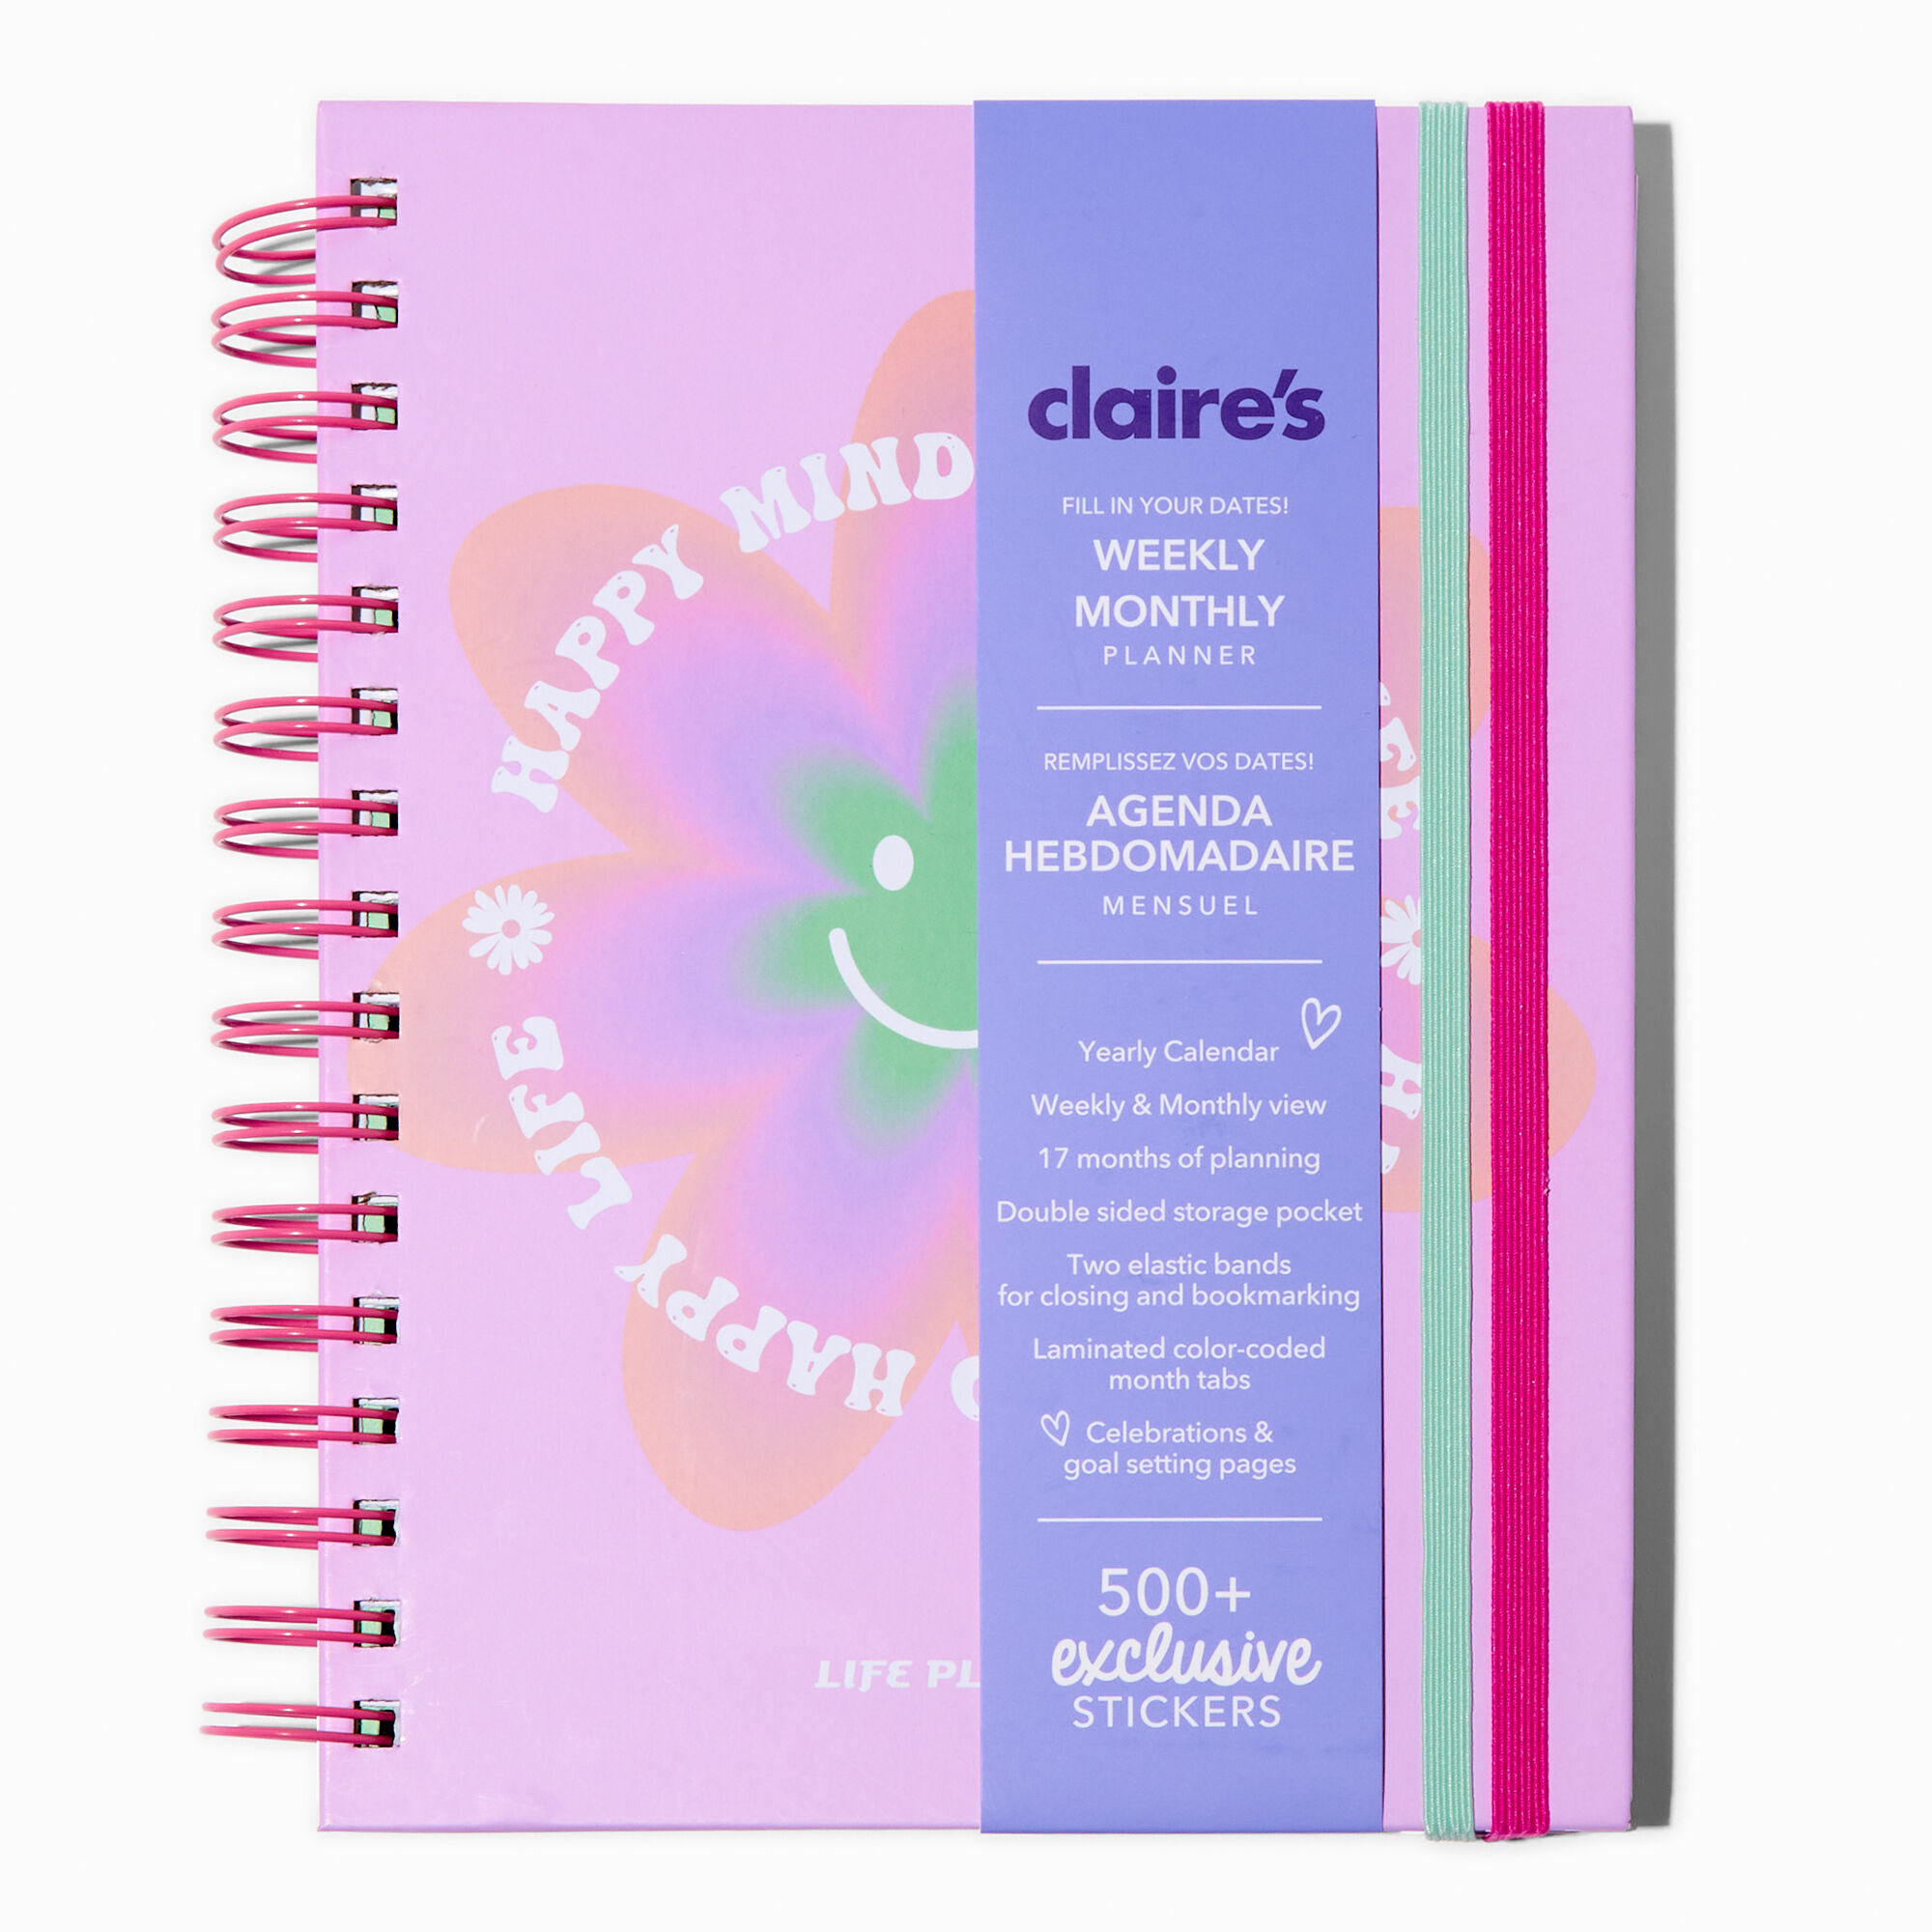 View Claires happy Mind Happy Life Weeklymonthly Undated Planner information